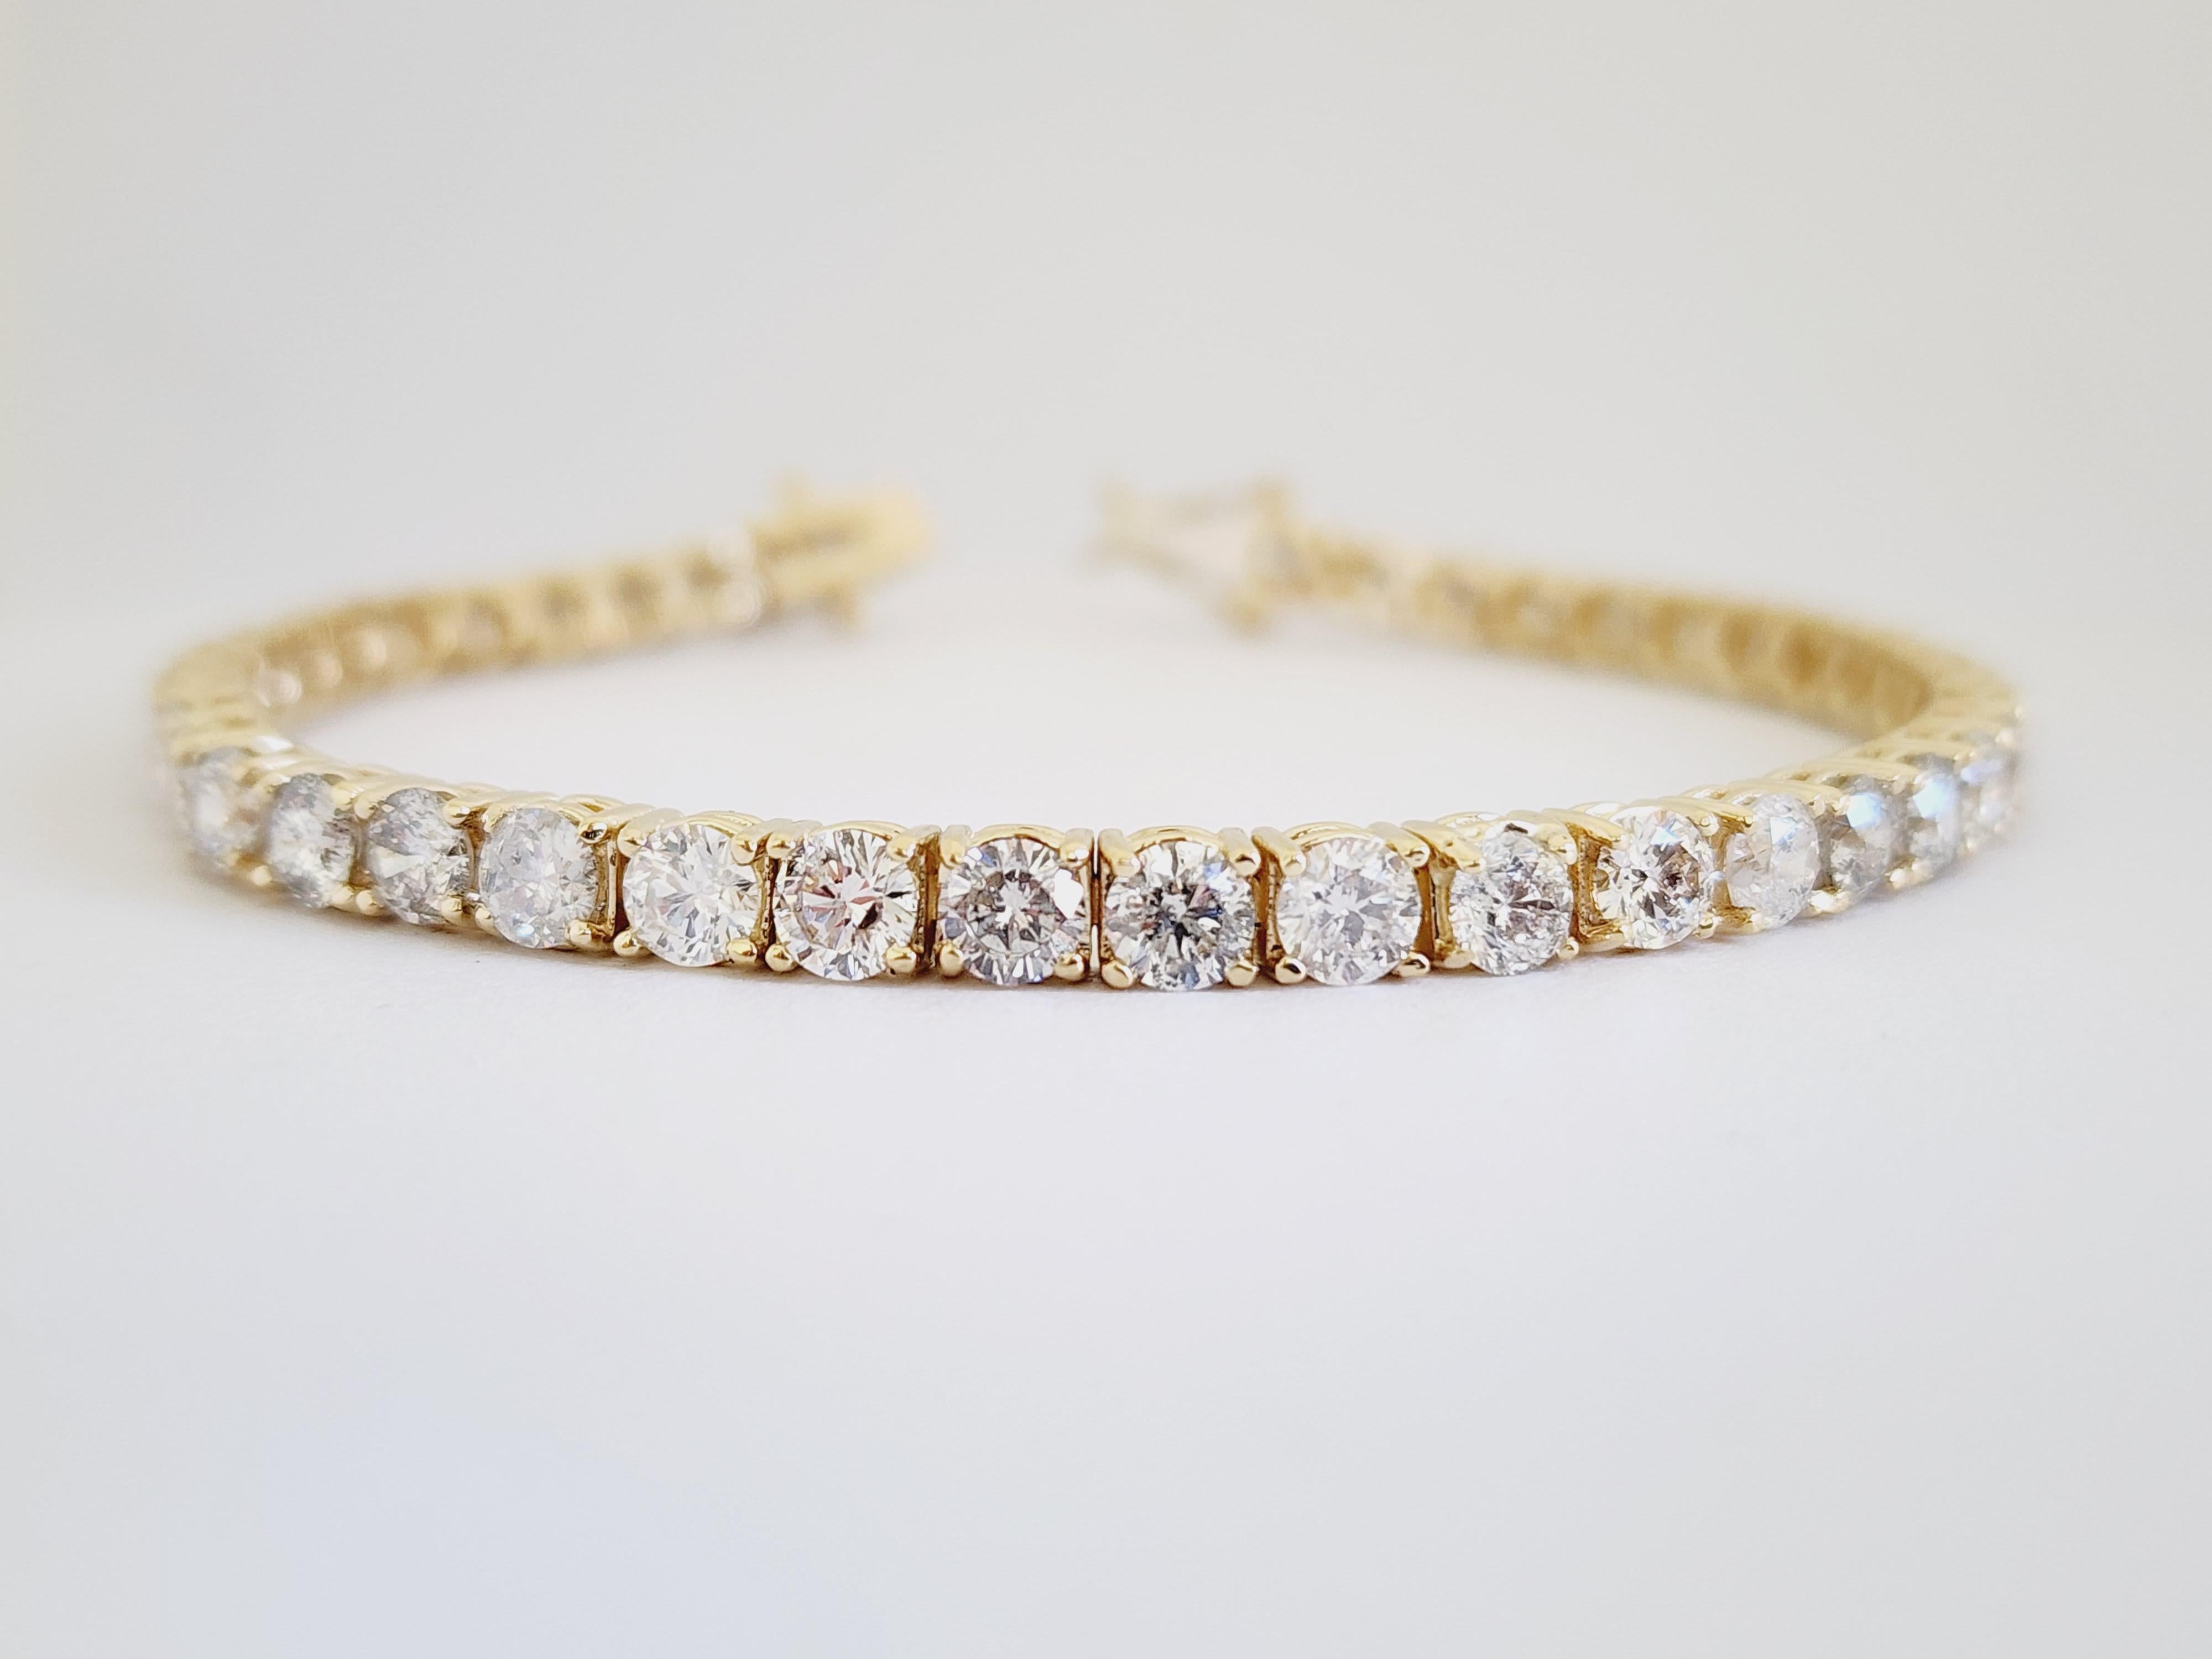 9.77 Carat Natural diamonds tennis bracelet round-brilliant cut  14k yellow gold. 
7 inch. Average Color F-G, Clarity SI-I. 3.9 mm wide. Very Shiny.

*Free shipping within the U.S.*